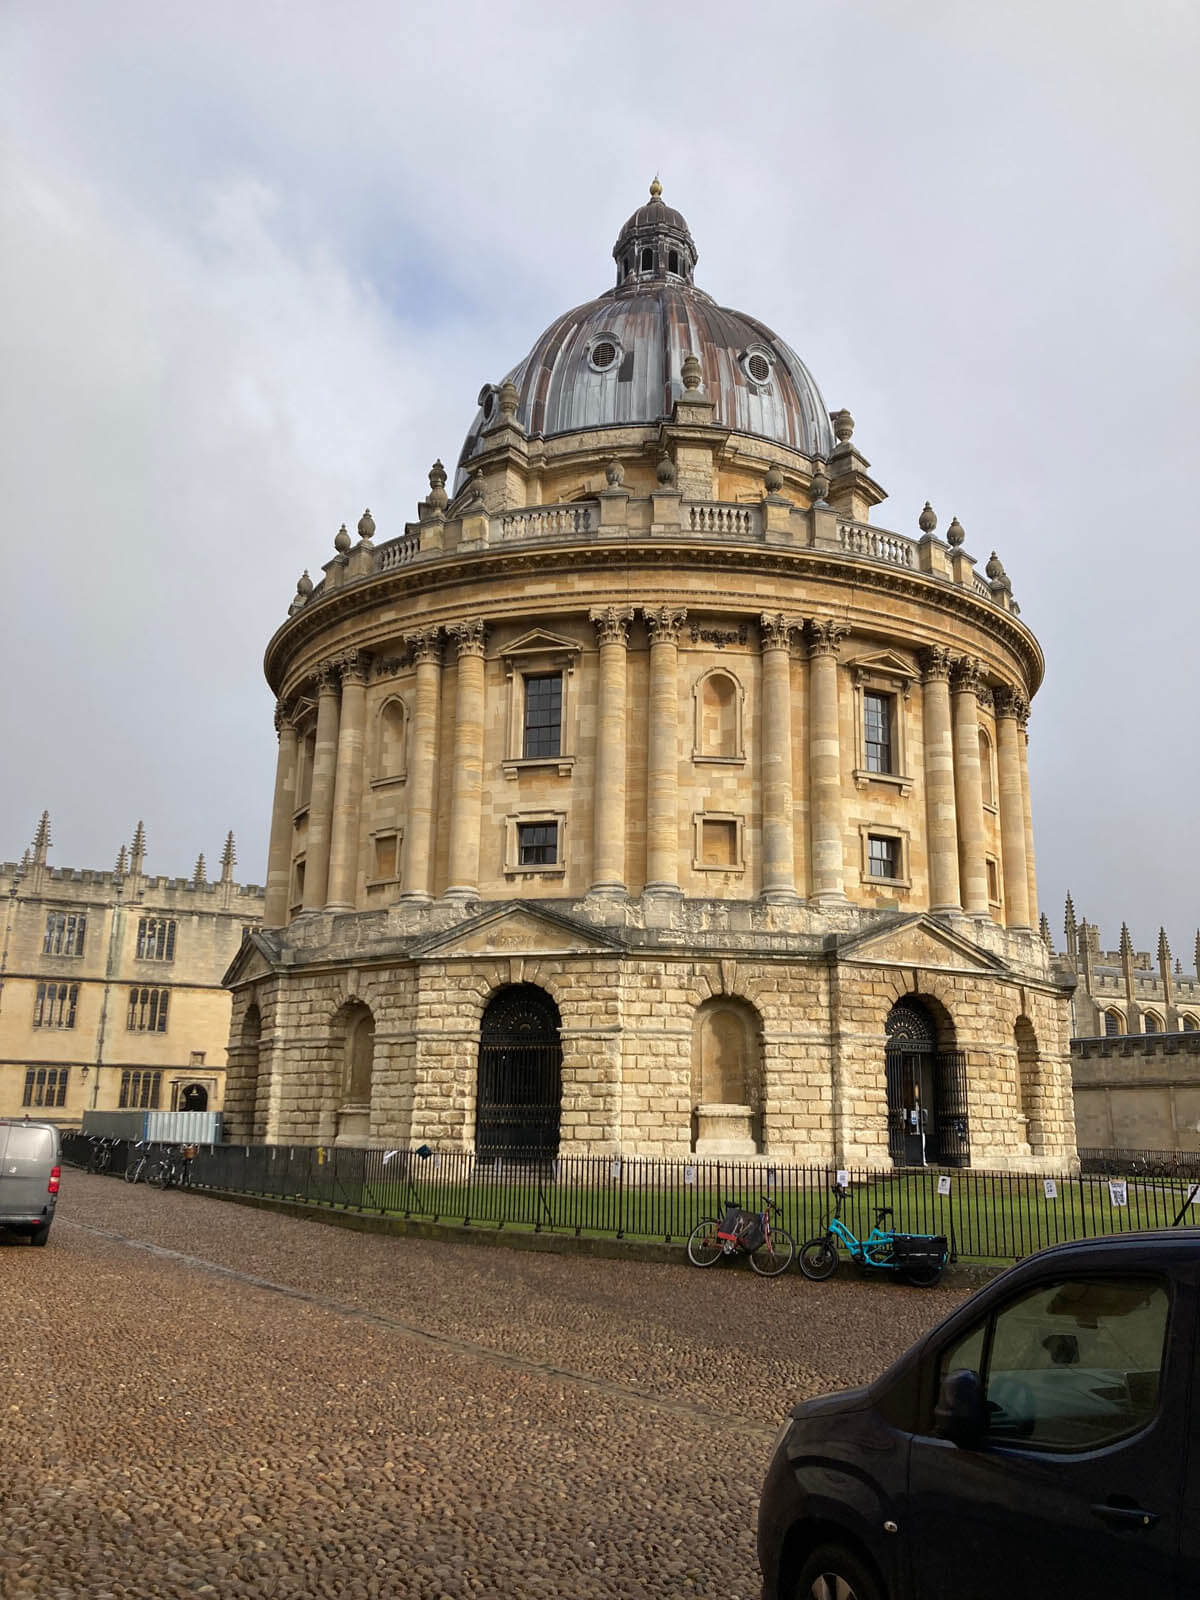 The Bodleian Library is one of the oldest libraries in Europe, and in Britain is second in size only to the British Library. Together, the Bodleian Libraries hold over 13 million printed items and was first opened to scholars in 1602.